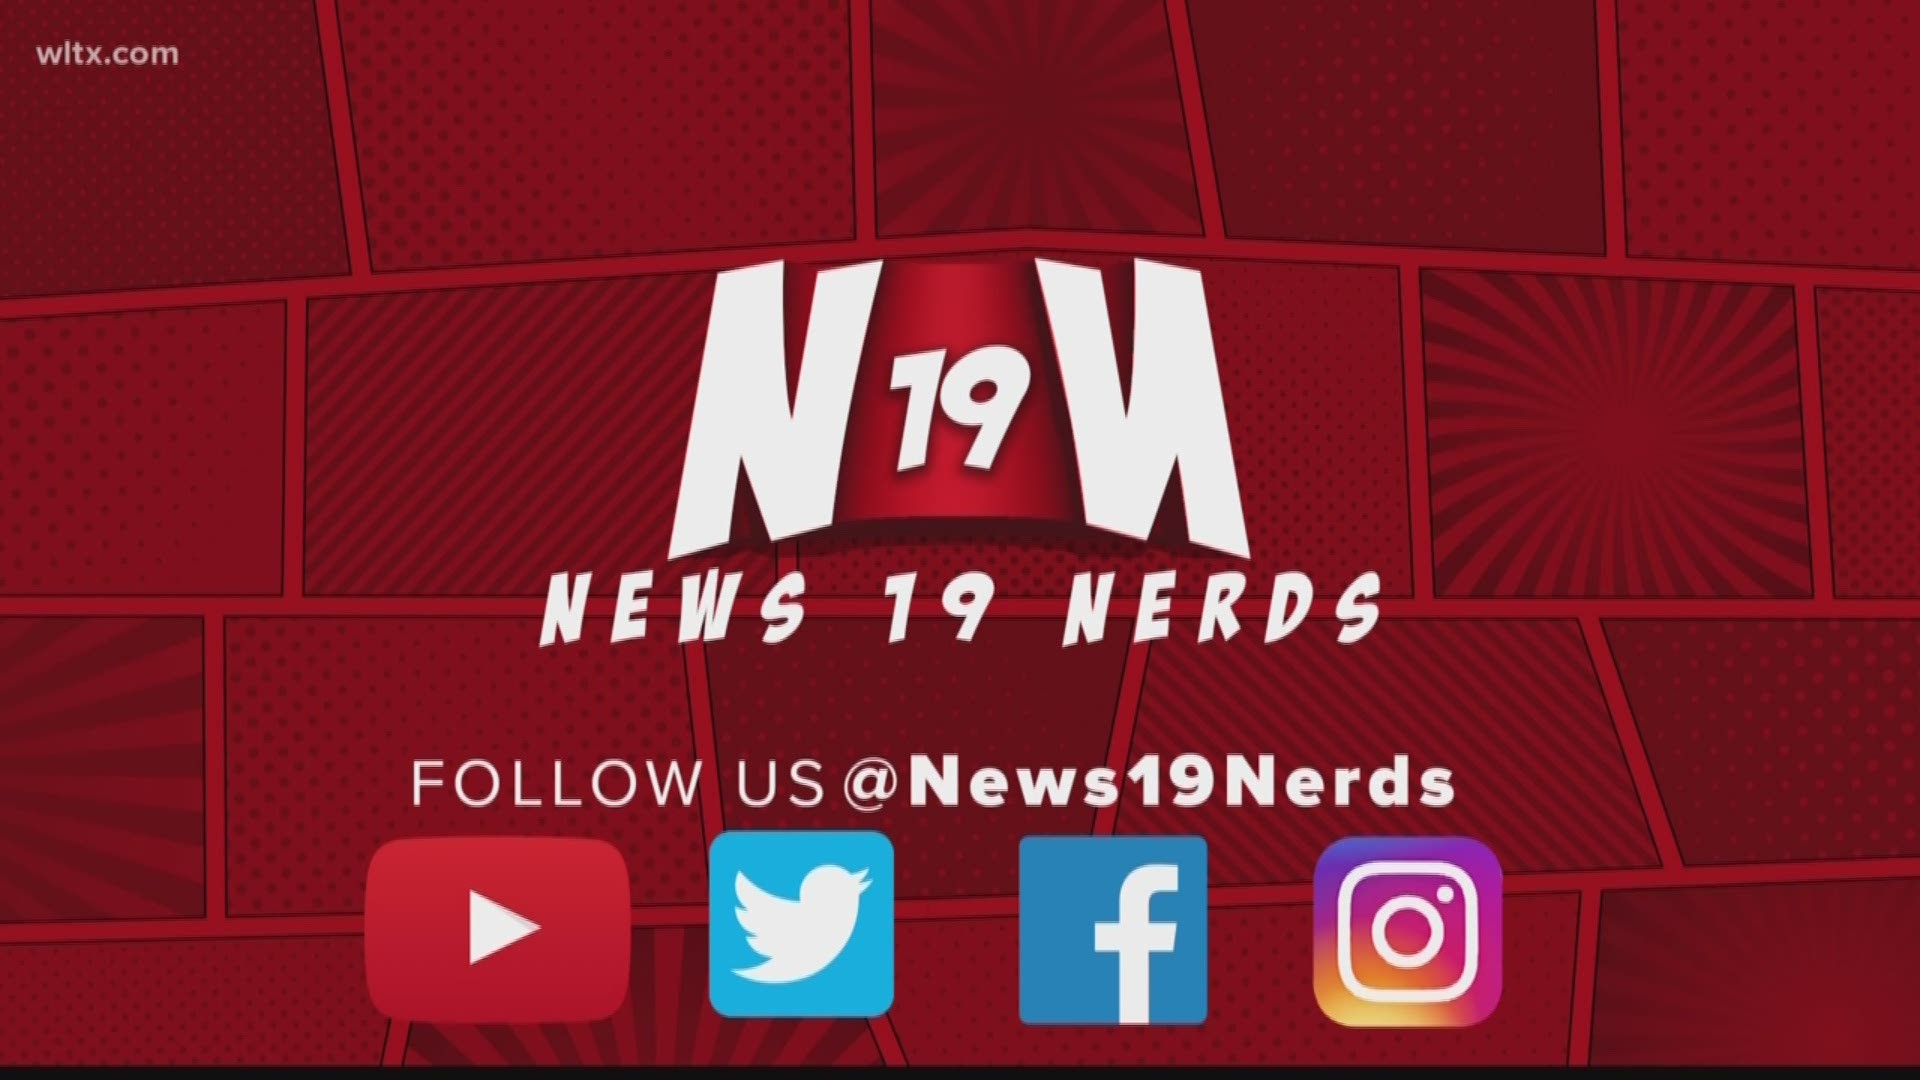 The News19 Nerds provide all the 'nerd' news you may have missed this week.